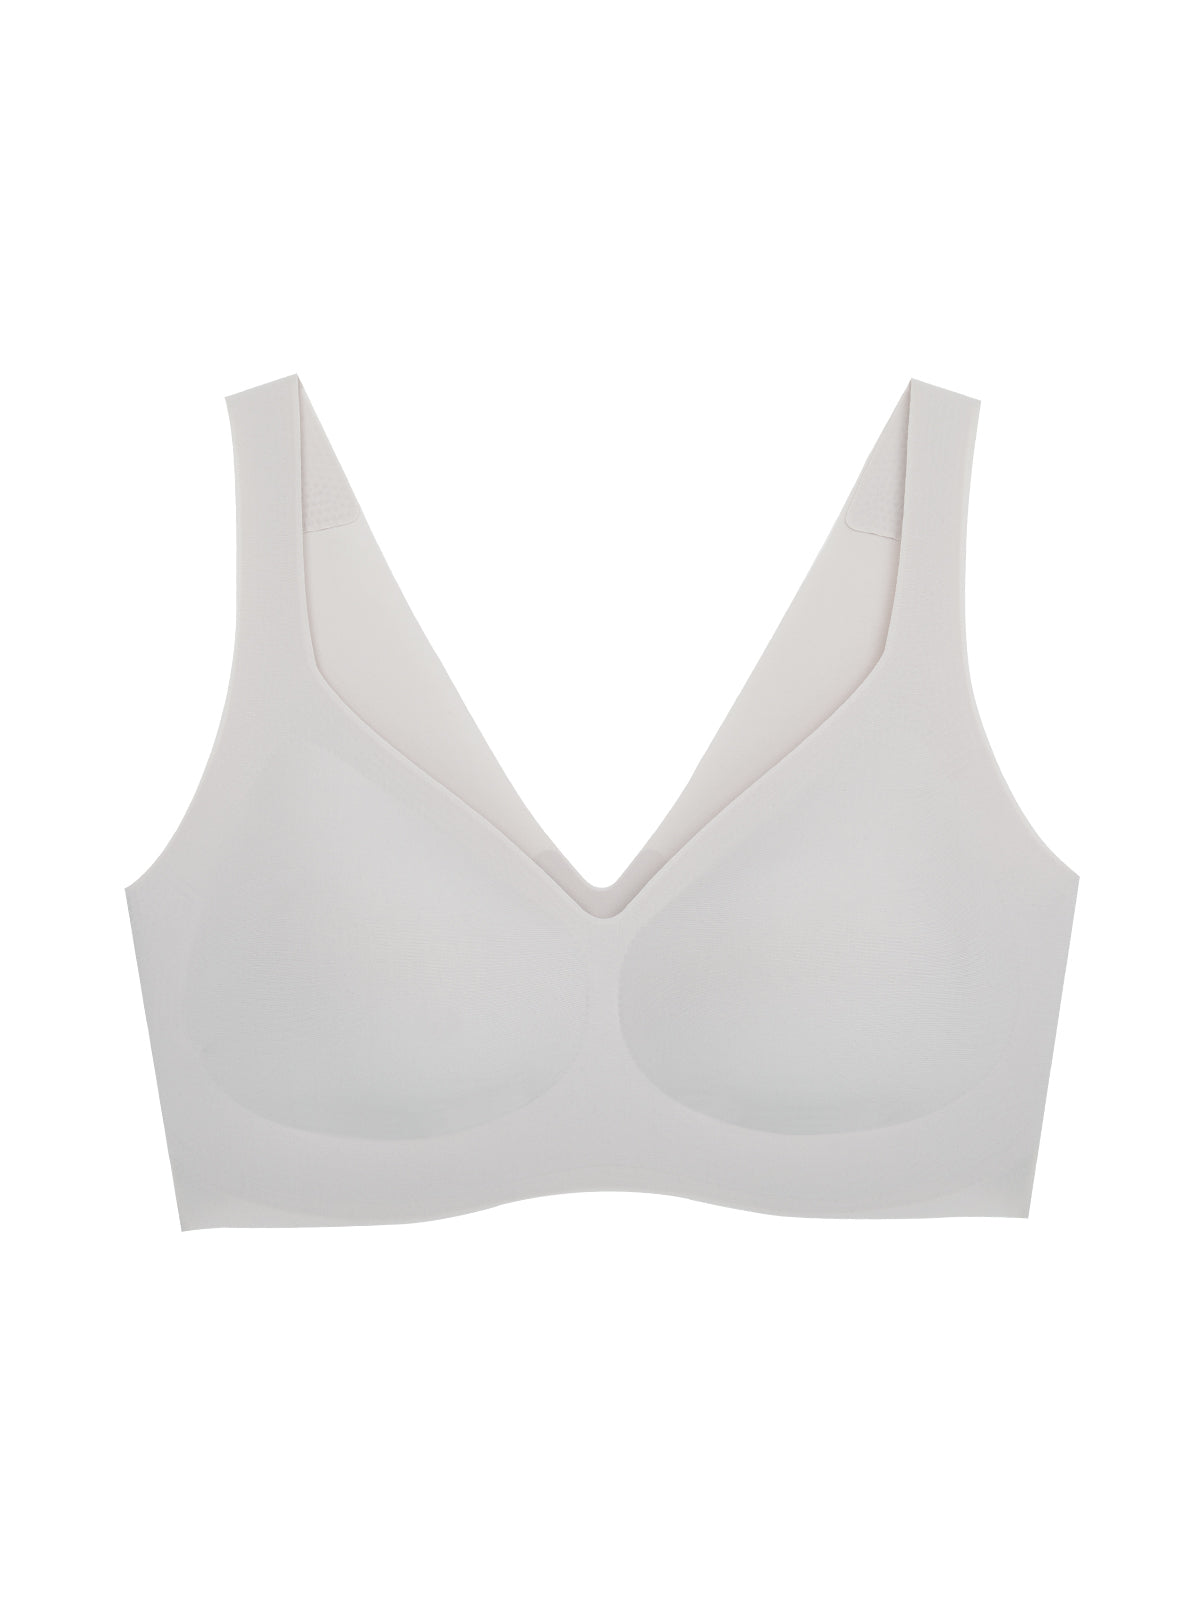 Ultimate Comfort at Work with the Wireless Bra